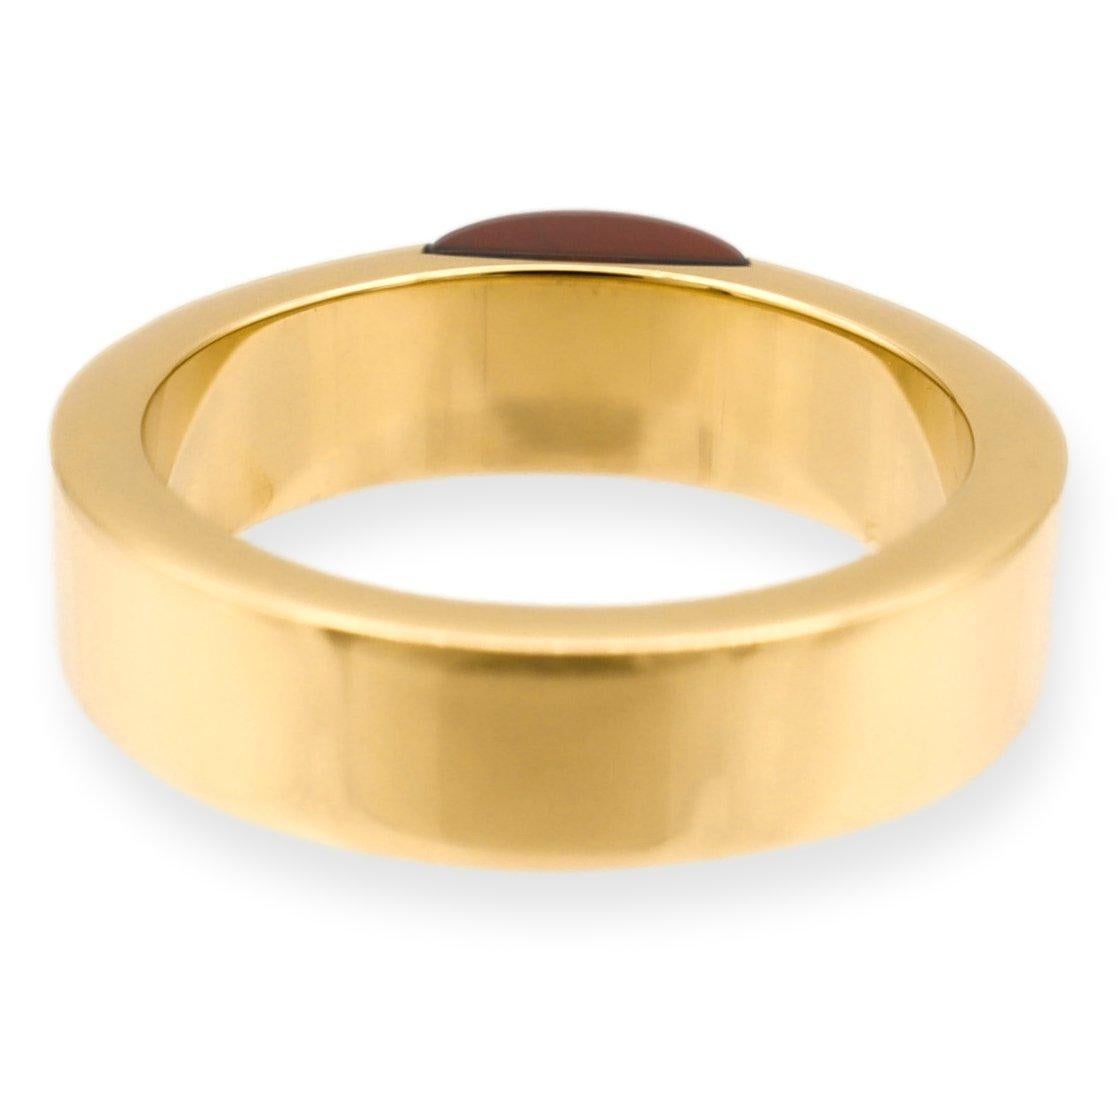 GUCCI 18K Yellow Gold Cabochon Garnet 5mm Band Ring In Excellent Condition For Sale In New York, NY